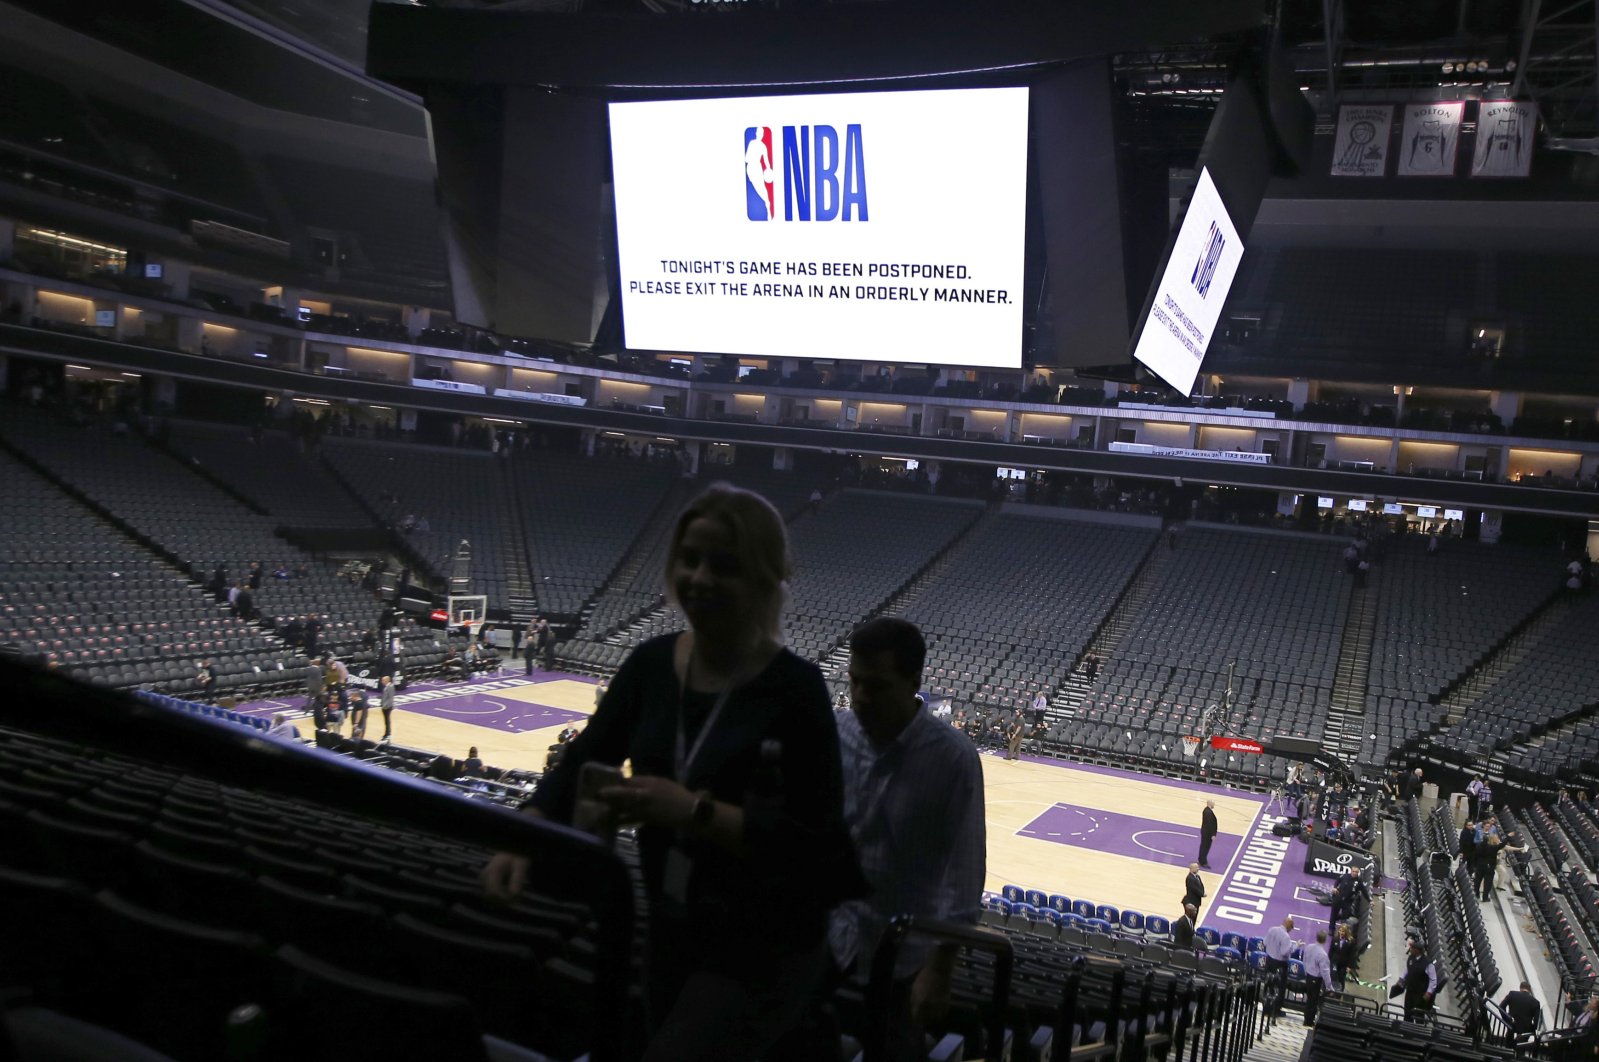 Fans leave the Golden 1 Center after the NBA basketball game between the New Orleans Pelicans and Sacramento Kings was postponed at the last minute in Sacramento, Calif., Wednesday, March 11, 2020. The league said the decision was made out of an "abundance of caution," because official Courtney Kirkland, who was scheduled to work the game, had worked the Utah Jazz game earlier in the week. A player for the Jazz tested positive for the coronavirus. (AP Photo)